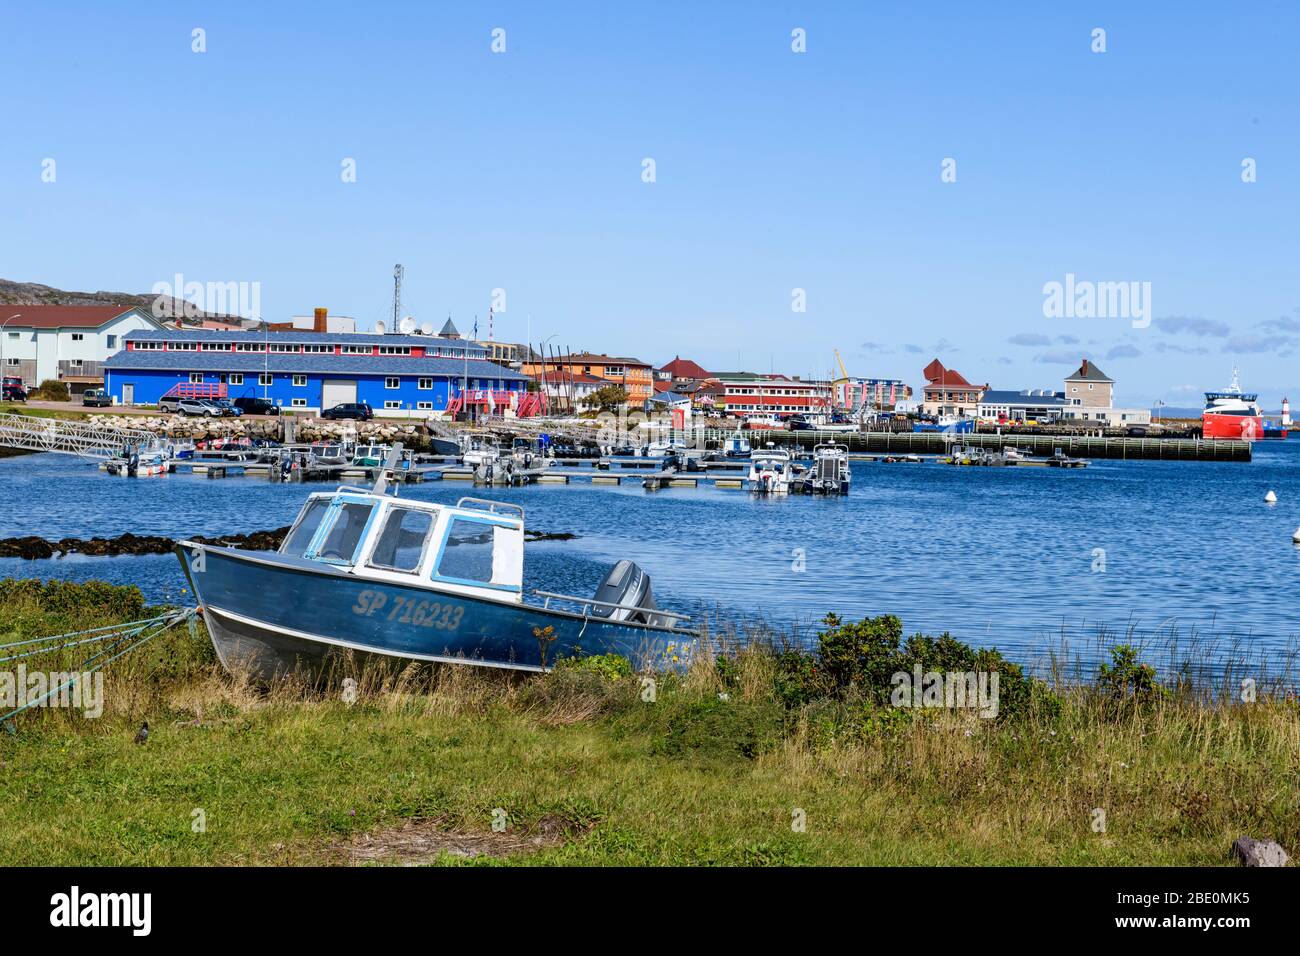 New France, St-PIerre et Miquelon, Canadian Maritimes. Fishing boats in harbor. Stock Photo